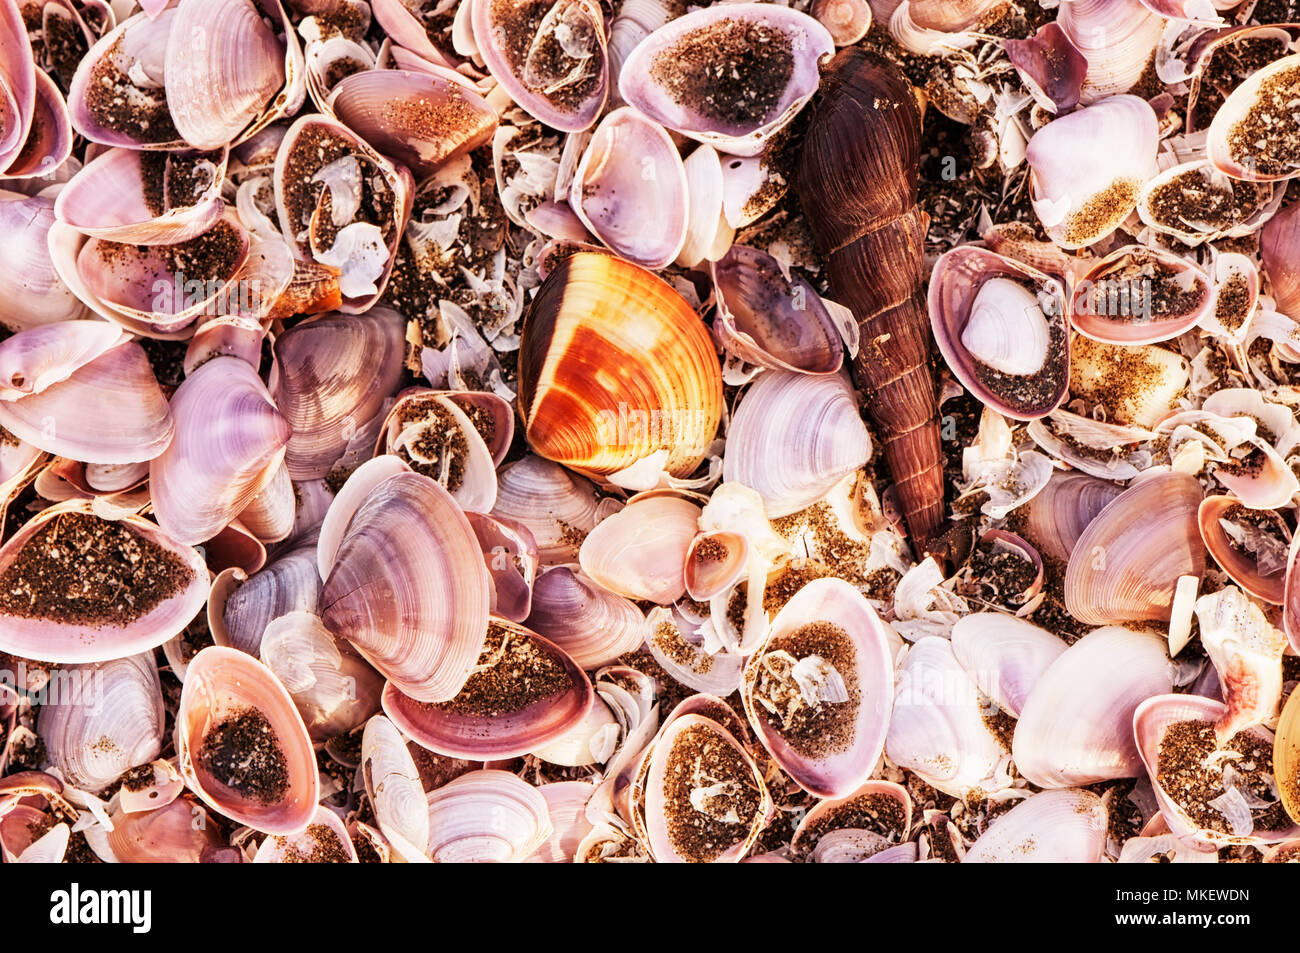 A variety of different shells on a beach in the Can Gio area of south Vietnam. Stock Photo